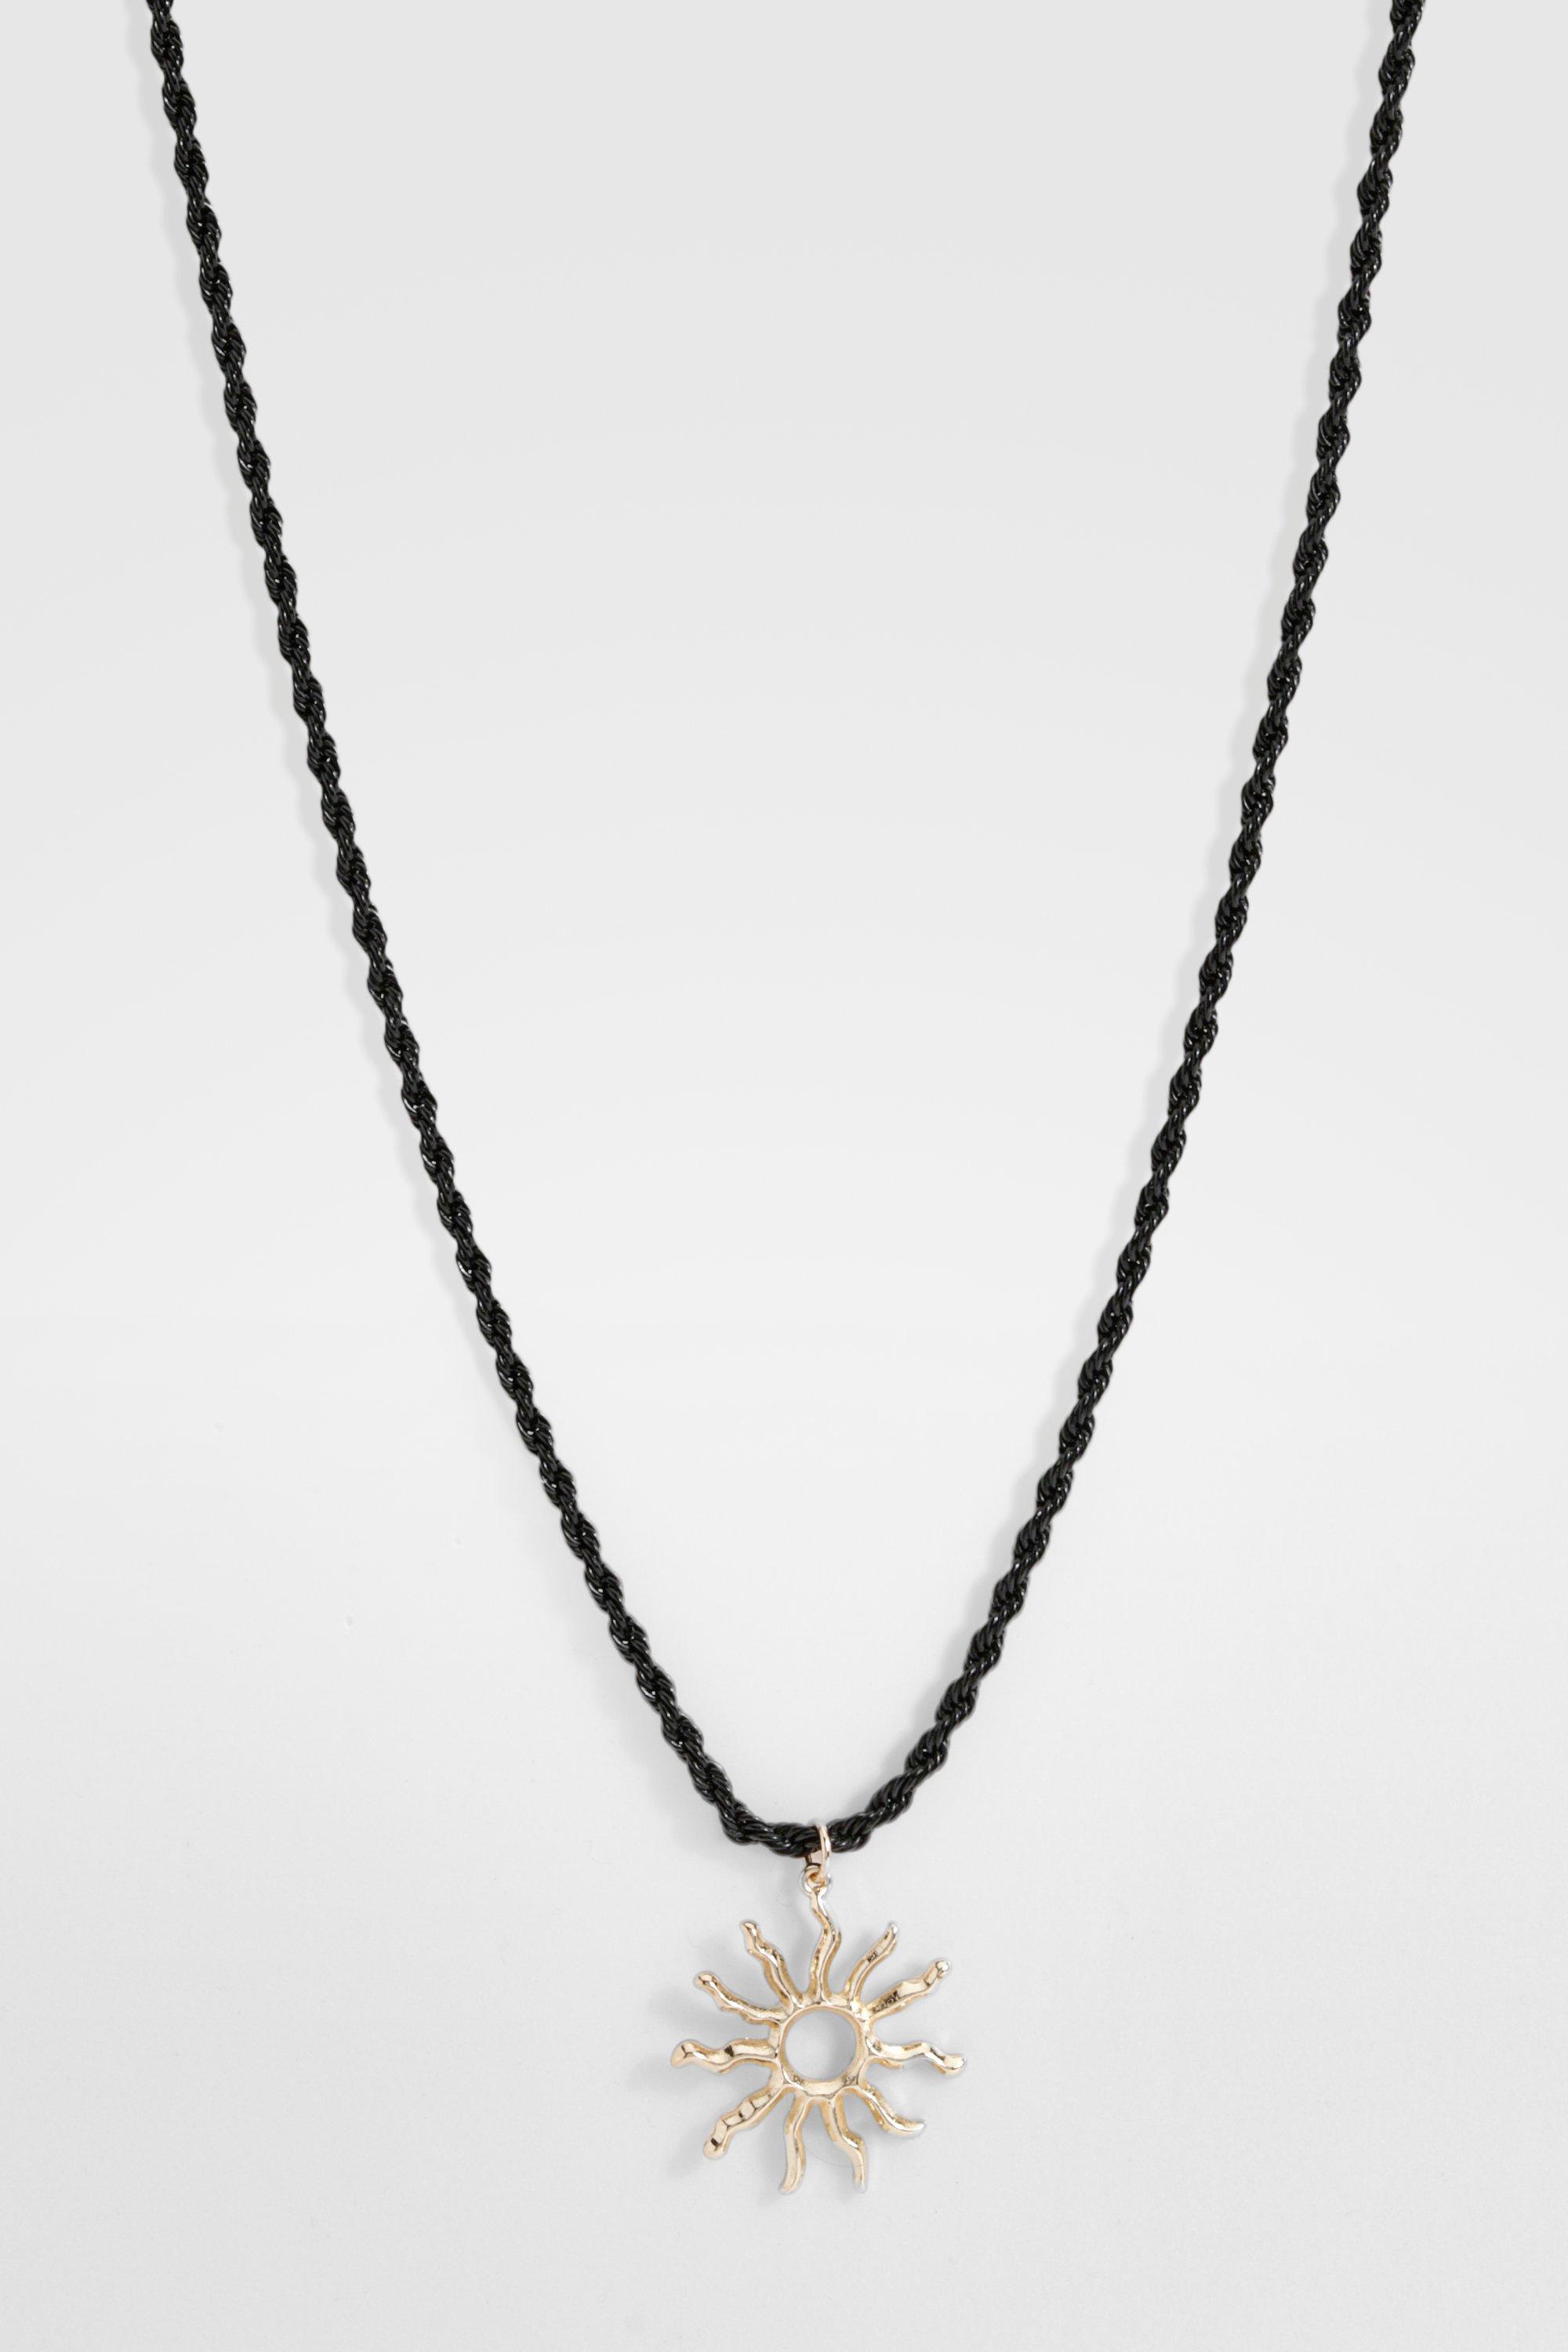 Image of Sun Rope Chain Necklace, Metallics